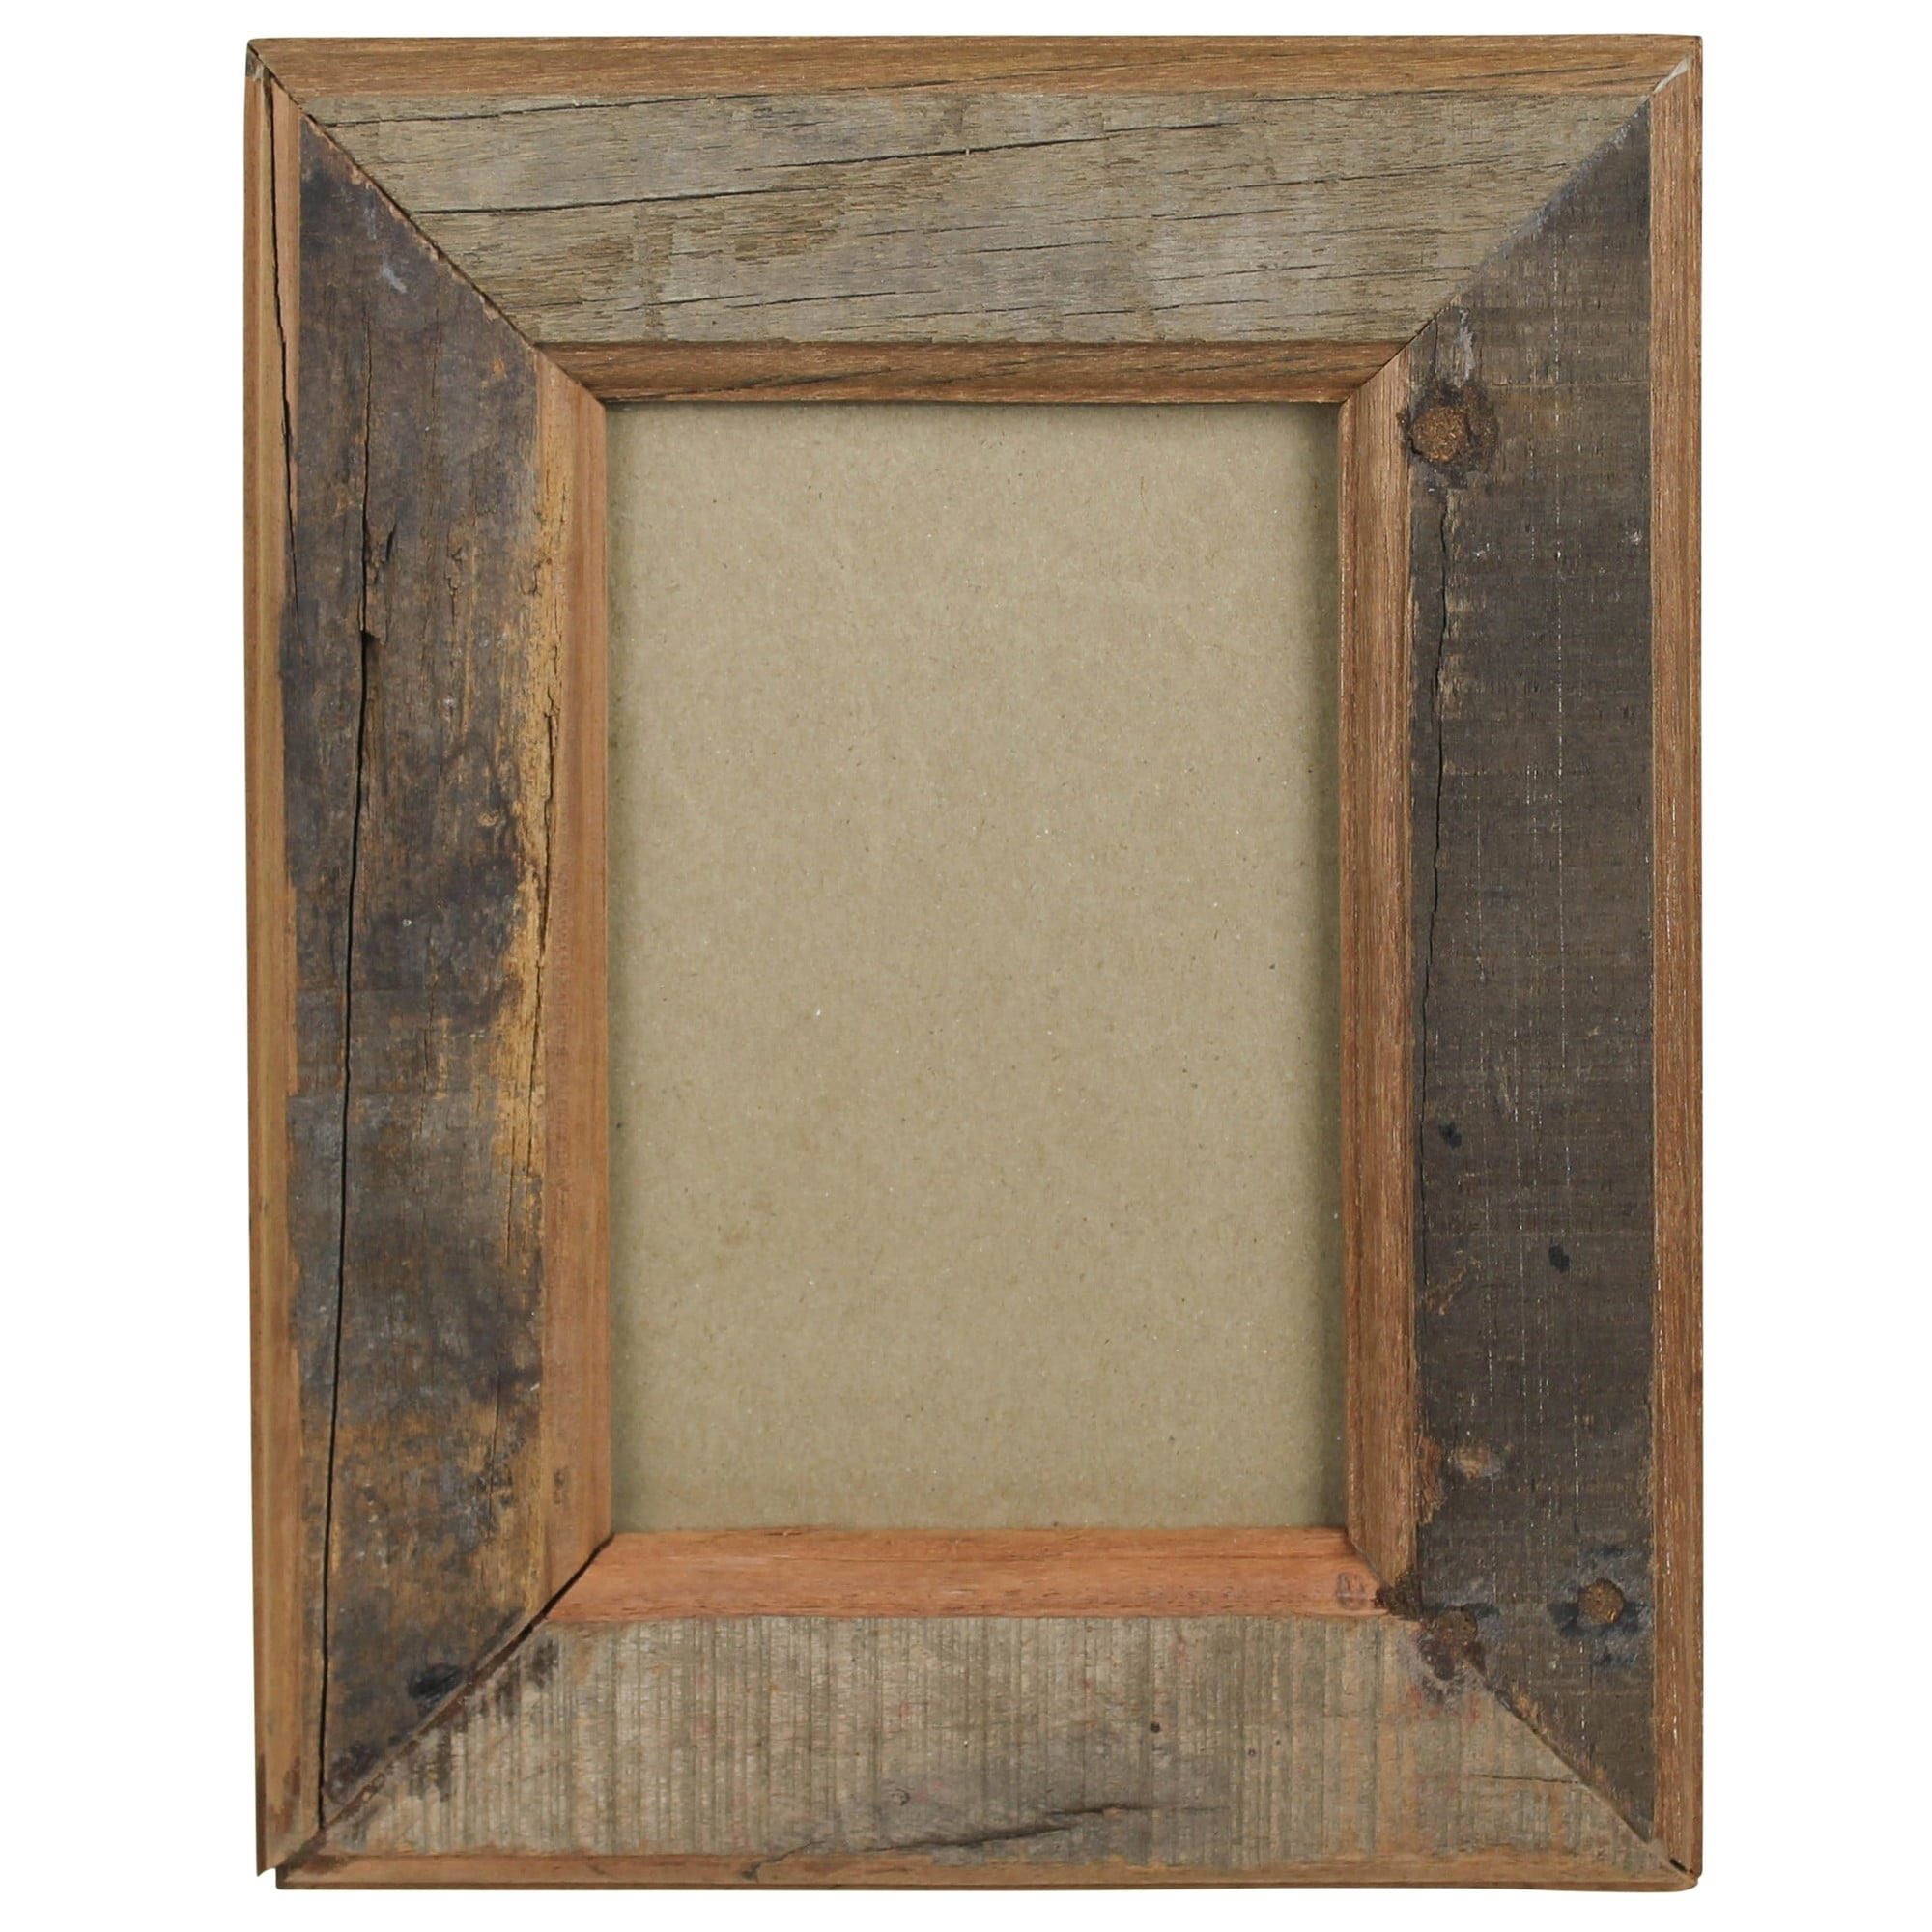 Details about   Barn Wood Picture Frame,Desk Top Photo Frames 4x6 5x7,Self Standing